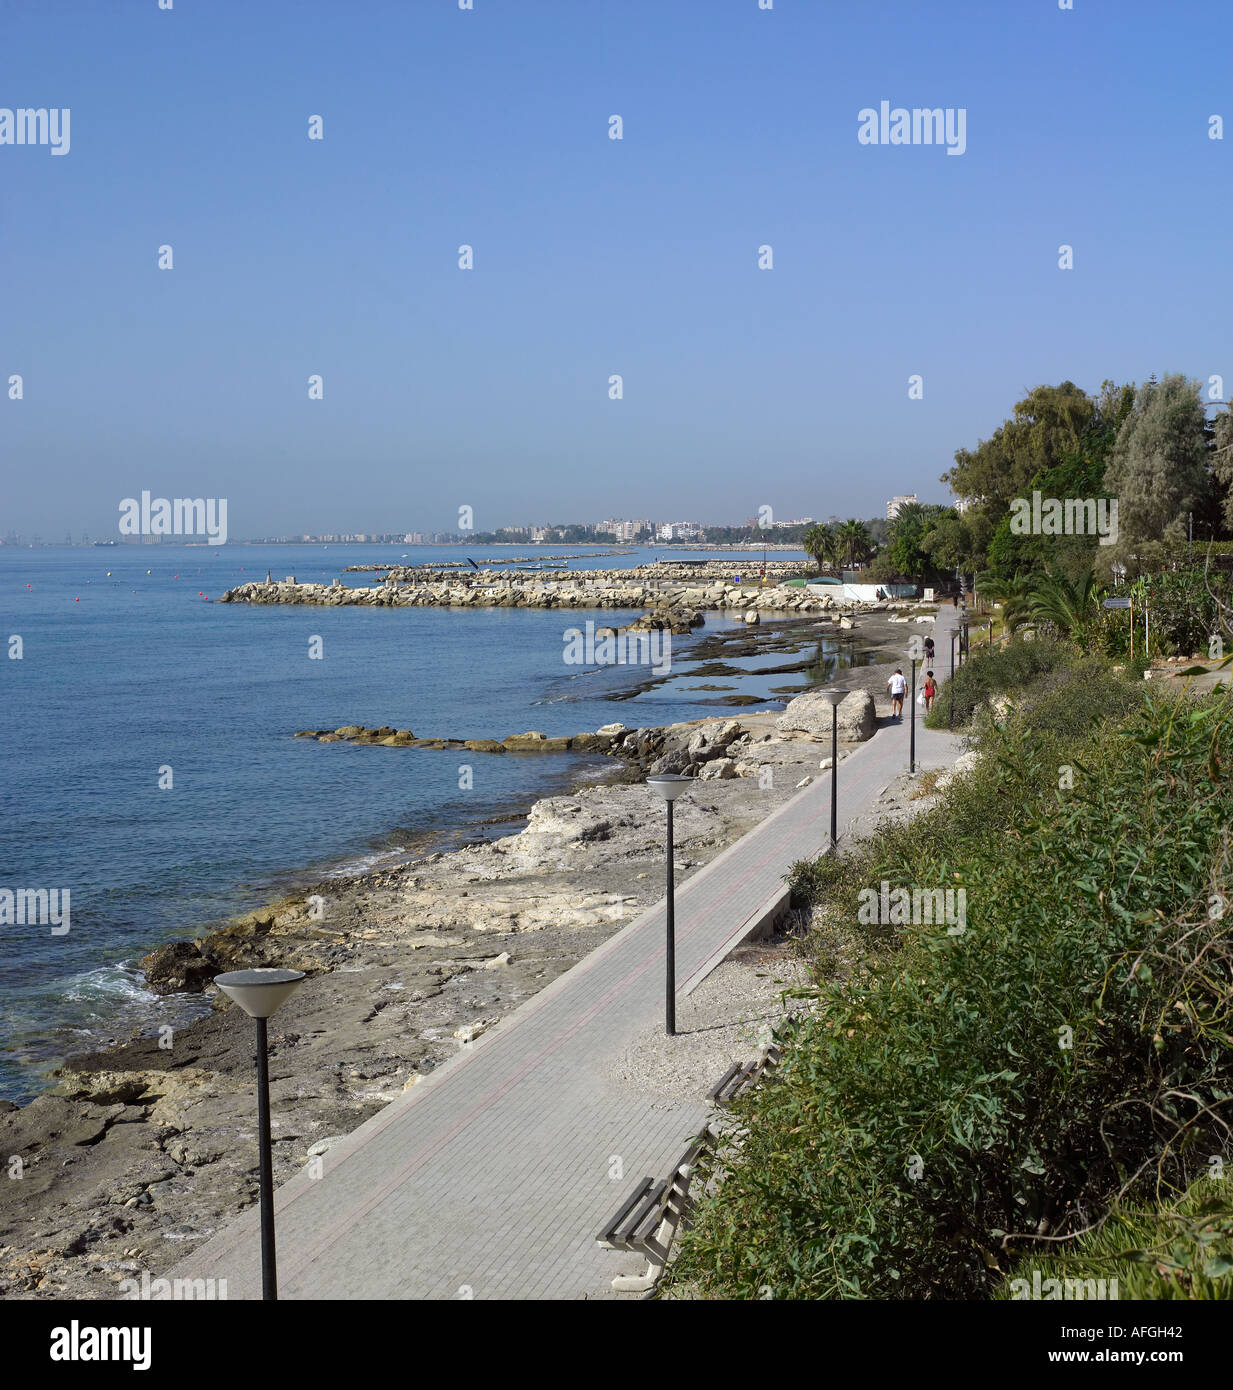 VIEW OF LIMASSOL CYPRUS FROM AMATHUS AREA Stock Photo